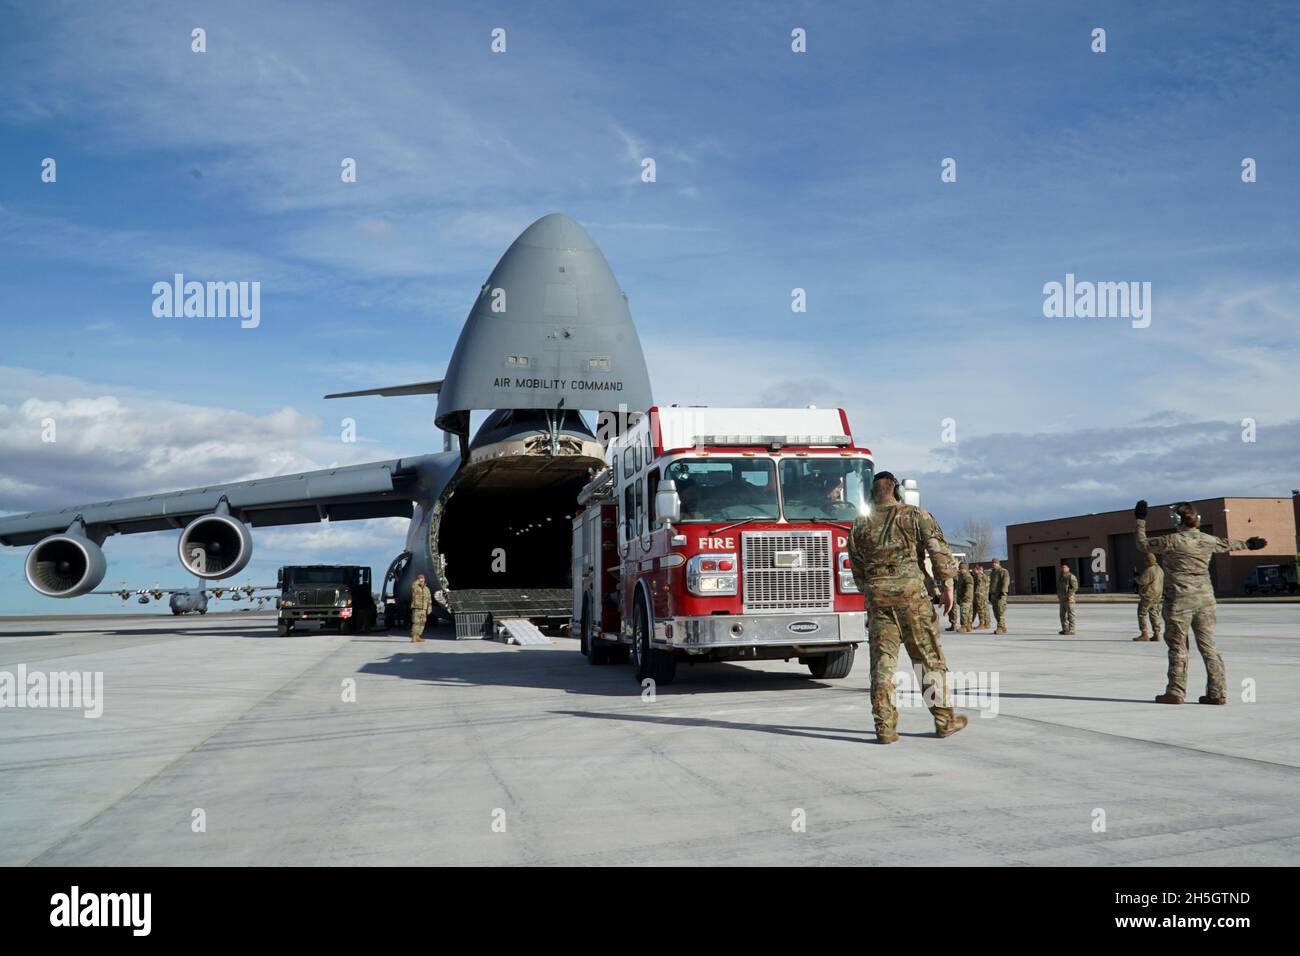 Members of the 120th Airlift Wing and the 60th Air Mobility Wing load a Spartan Guardian fire truck onto a U.S. Air Force C-5M Super Galaxy at the Montana Air Guard Base, Great Falls, Mt, Nov. 6, 2021. Airmen from the 120th Airlift Wing and 60th Air Mobility Wing load three fire trucks onto a C-5M Super Galaxy for delivery to Belize, as part of the Defense Department’s Denton Program, which provides humanitarian aid supplies all over the world.(U.S. Air National Guard photo by Tech. Sgt. Lindsey Soulsby) Stock Photo